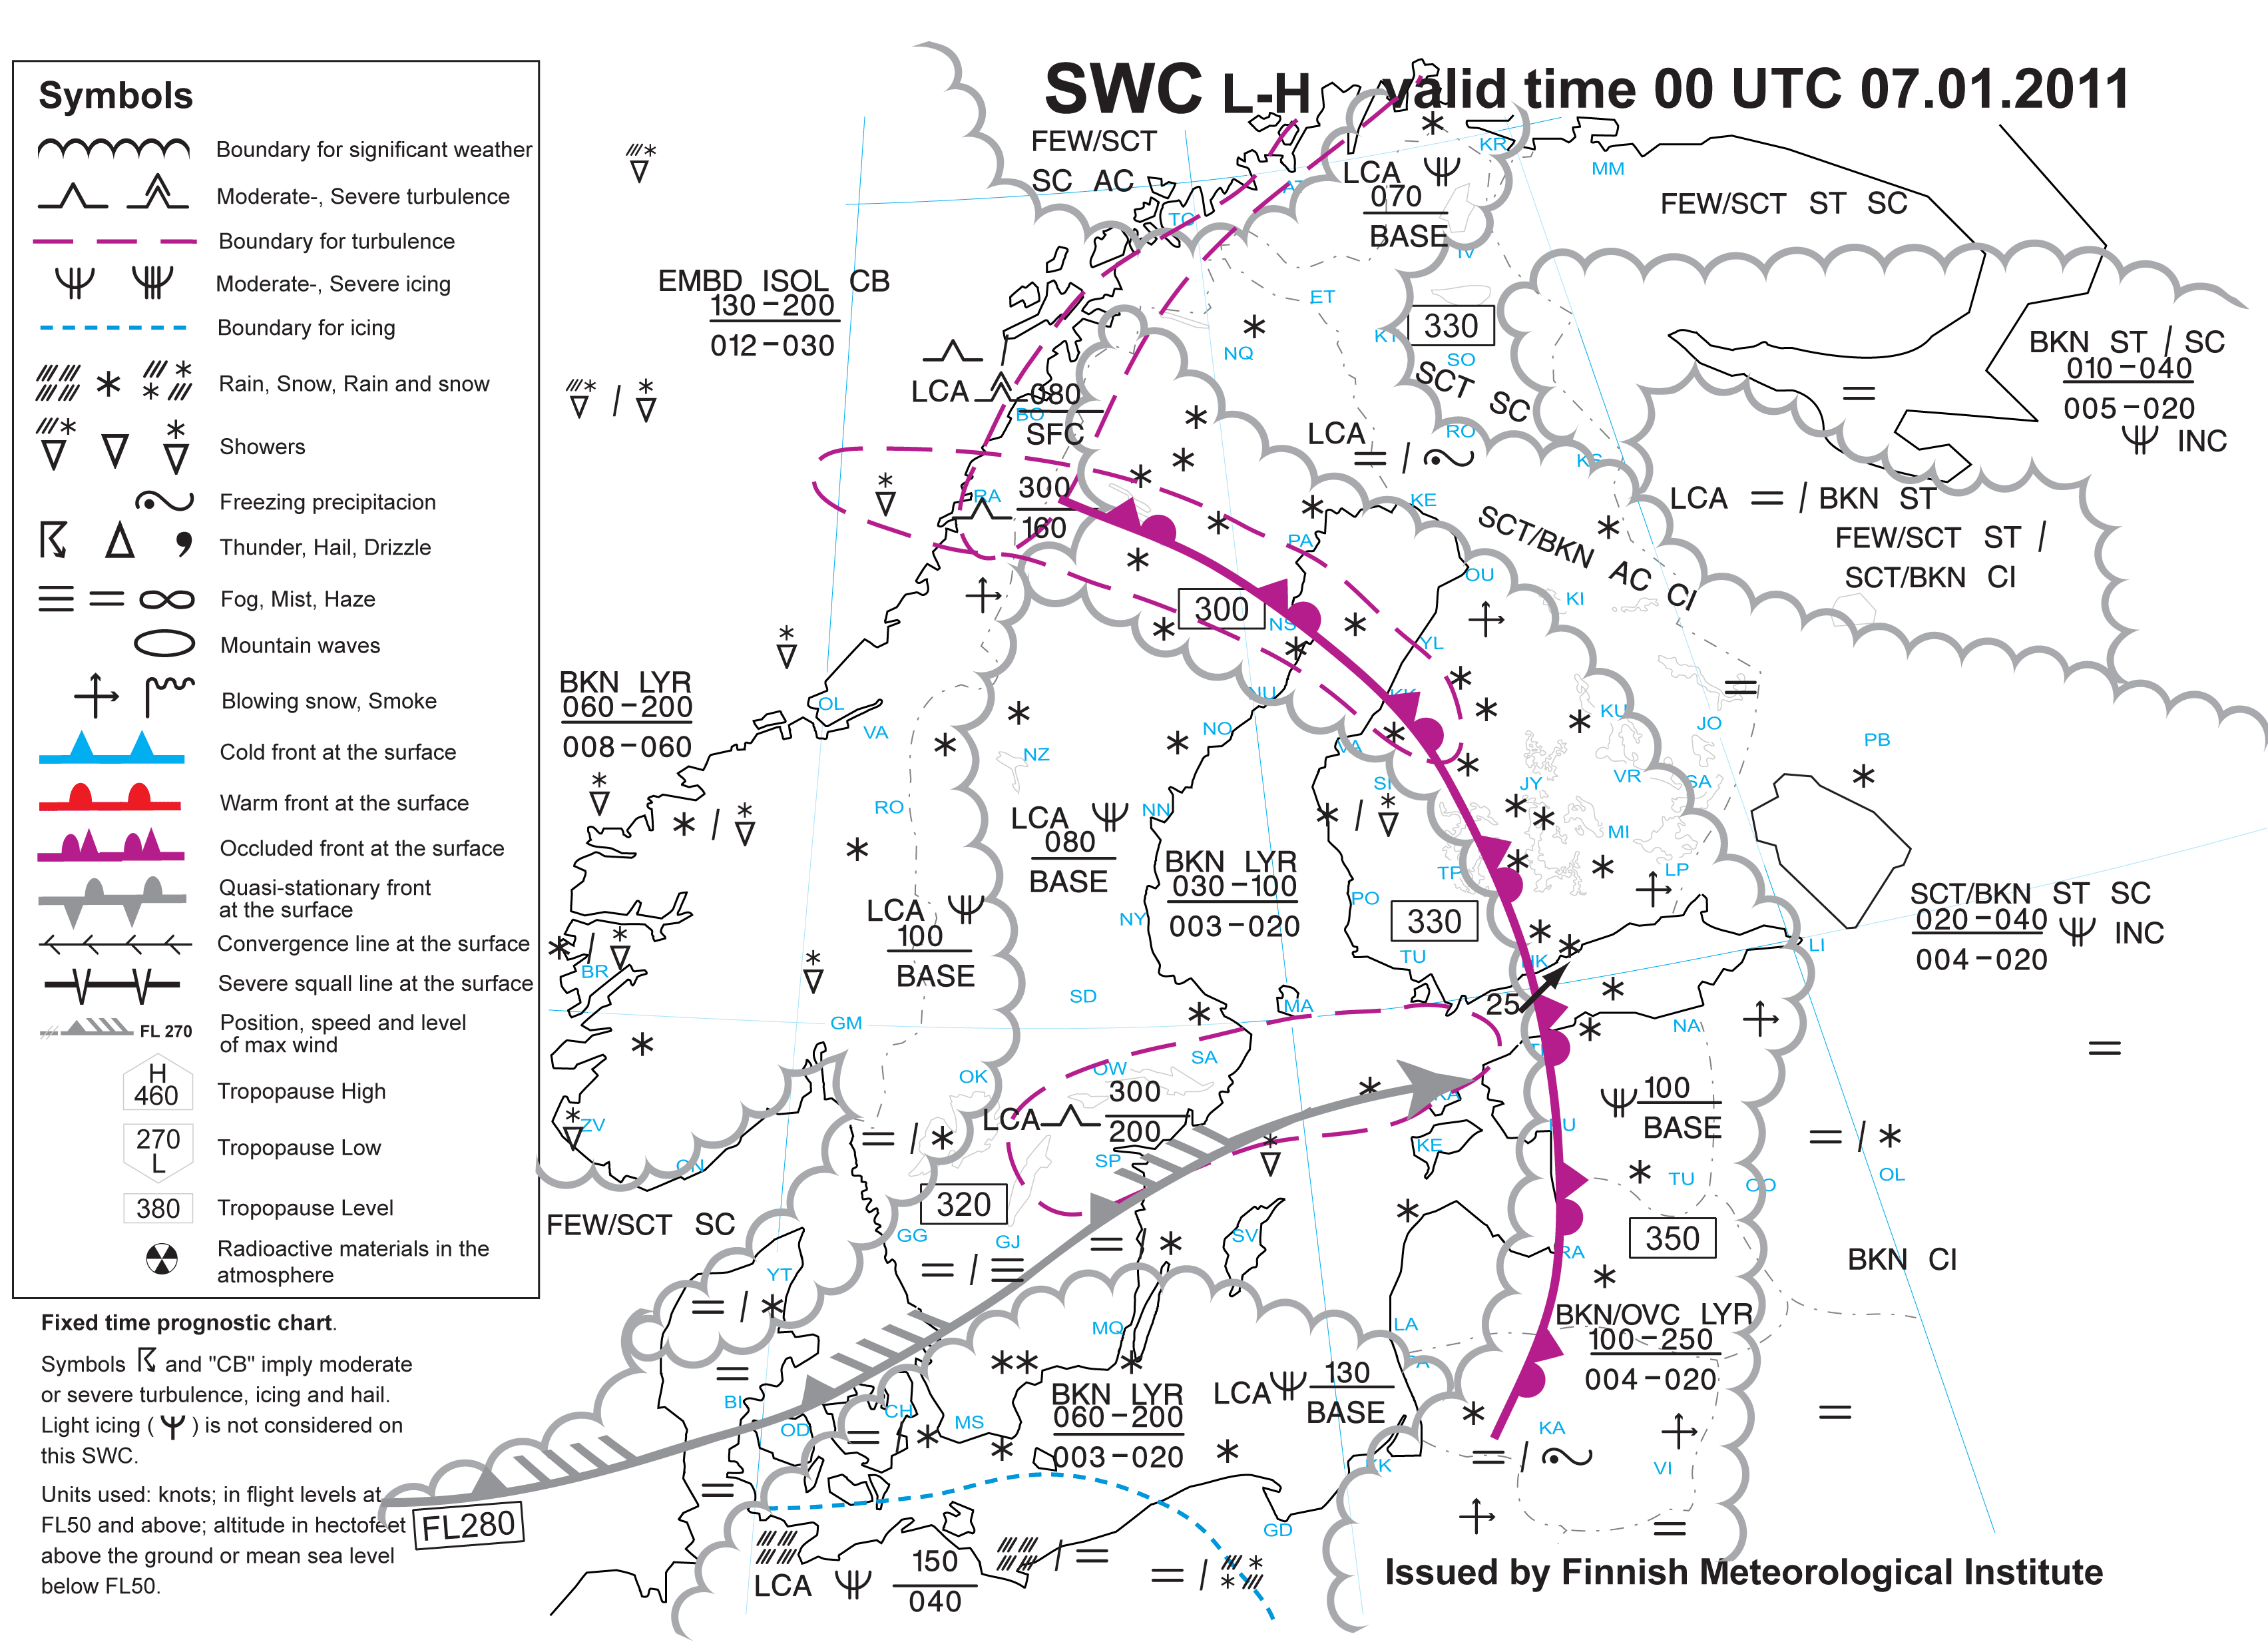 Significant Weather Chart Europe